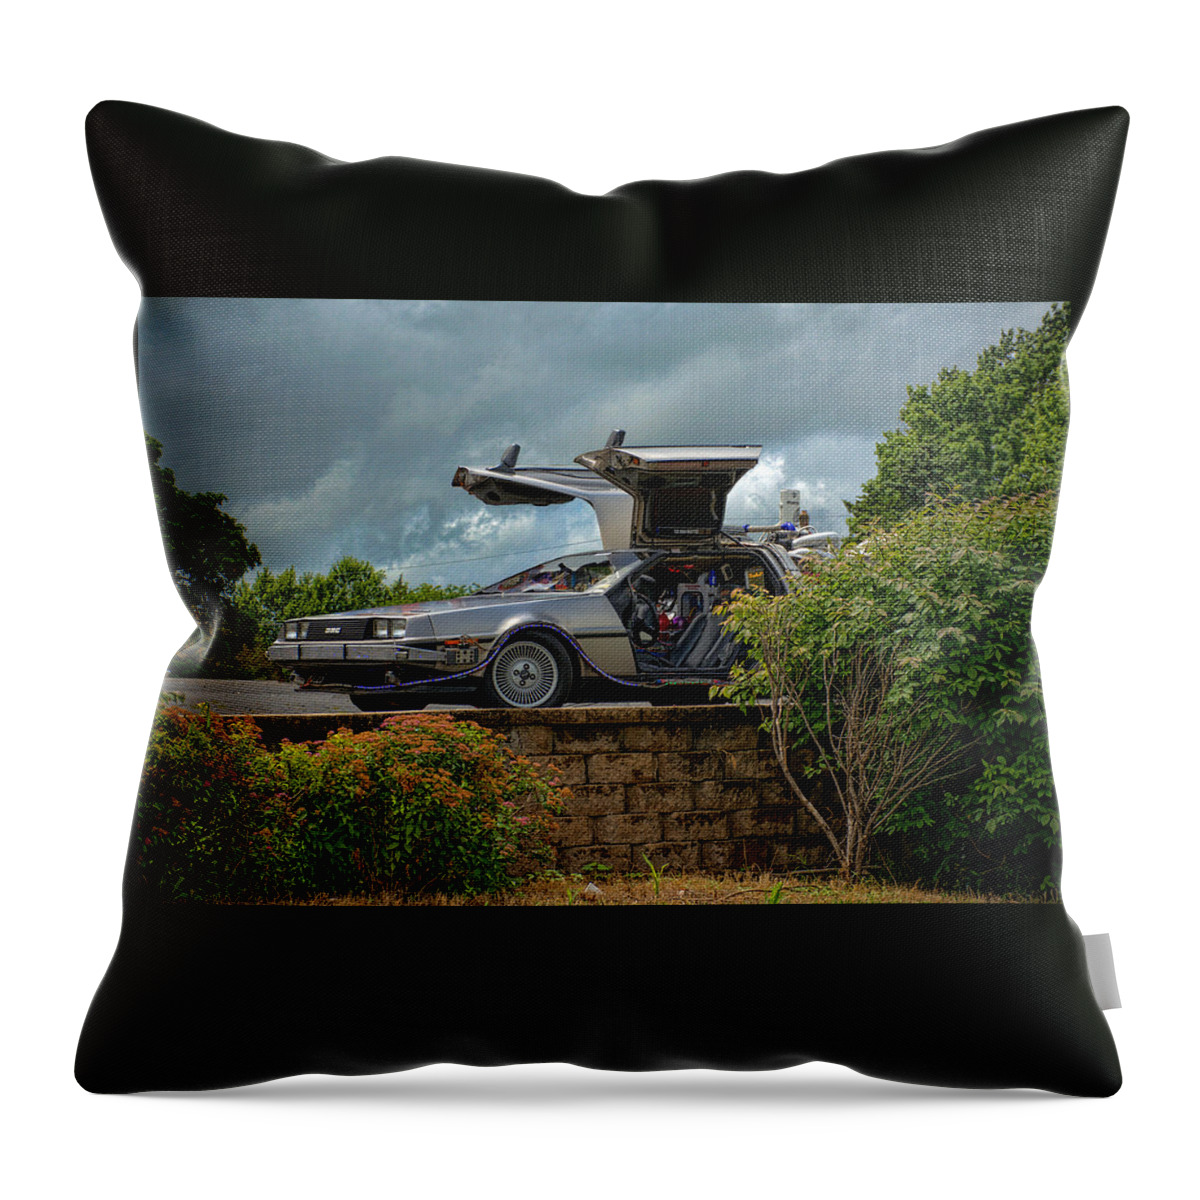 Back To The Future Ii Throw Pillow featuring the photograph Back to the Future II Replica by Tim McCullough